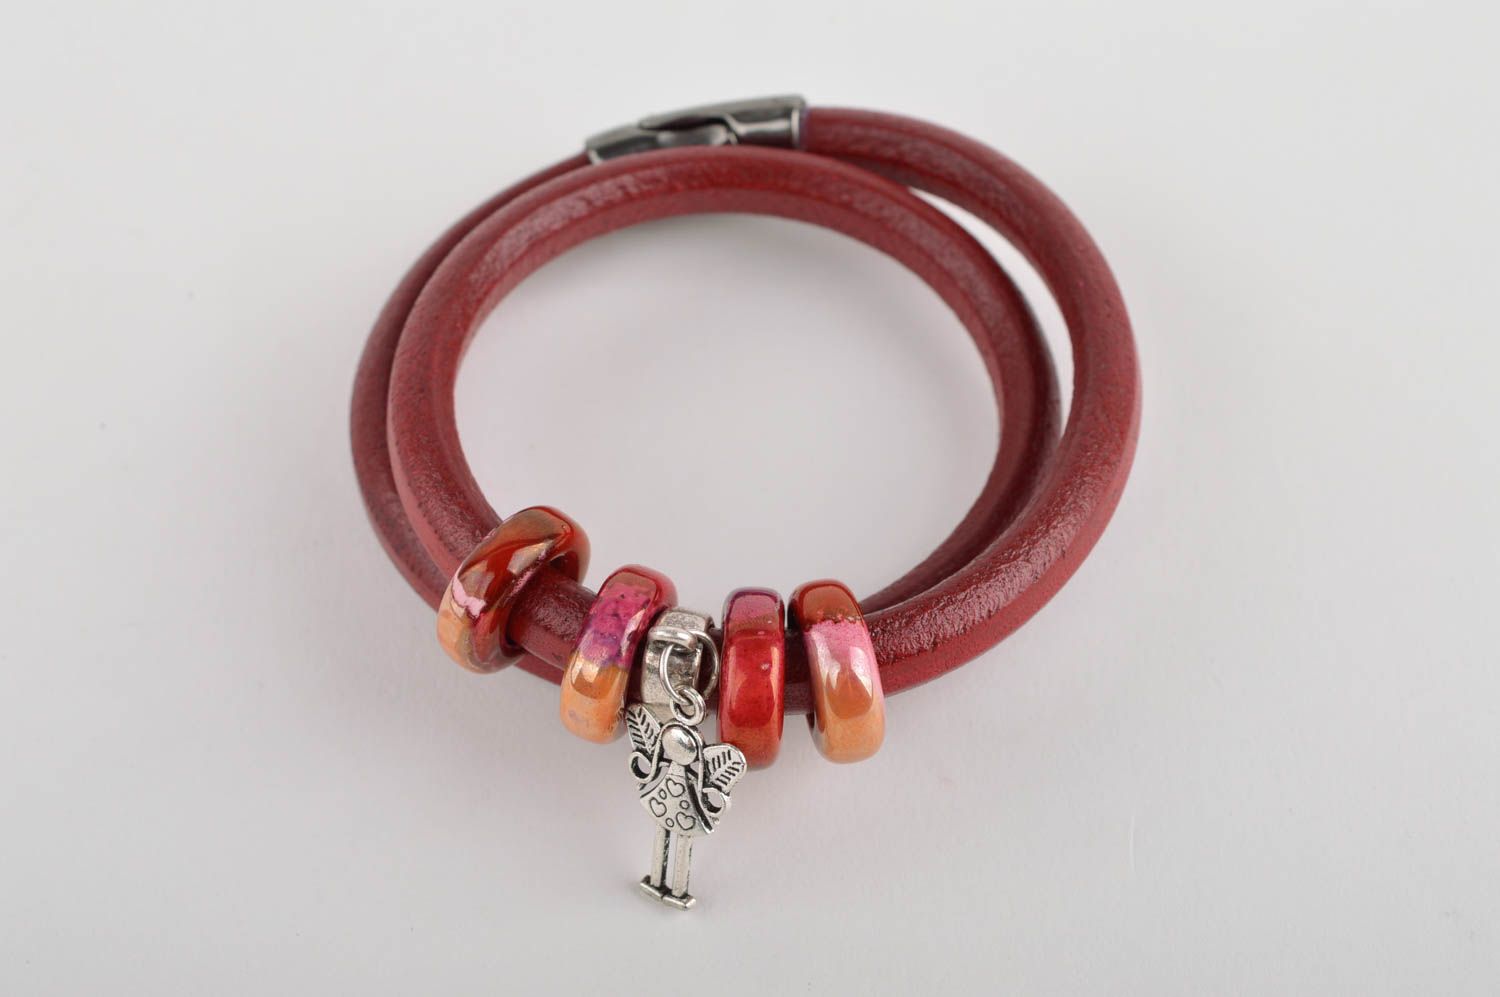 Unusual handmadeleather necklace design leather wrist bracelet gifts for her photo 5